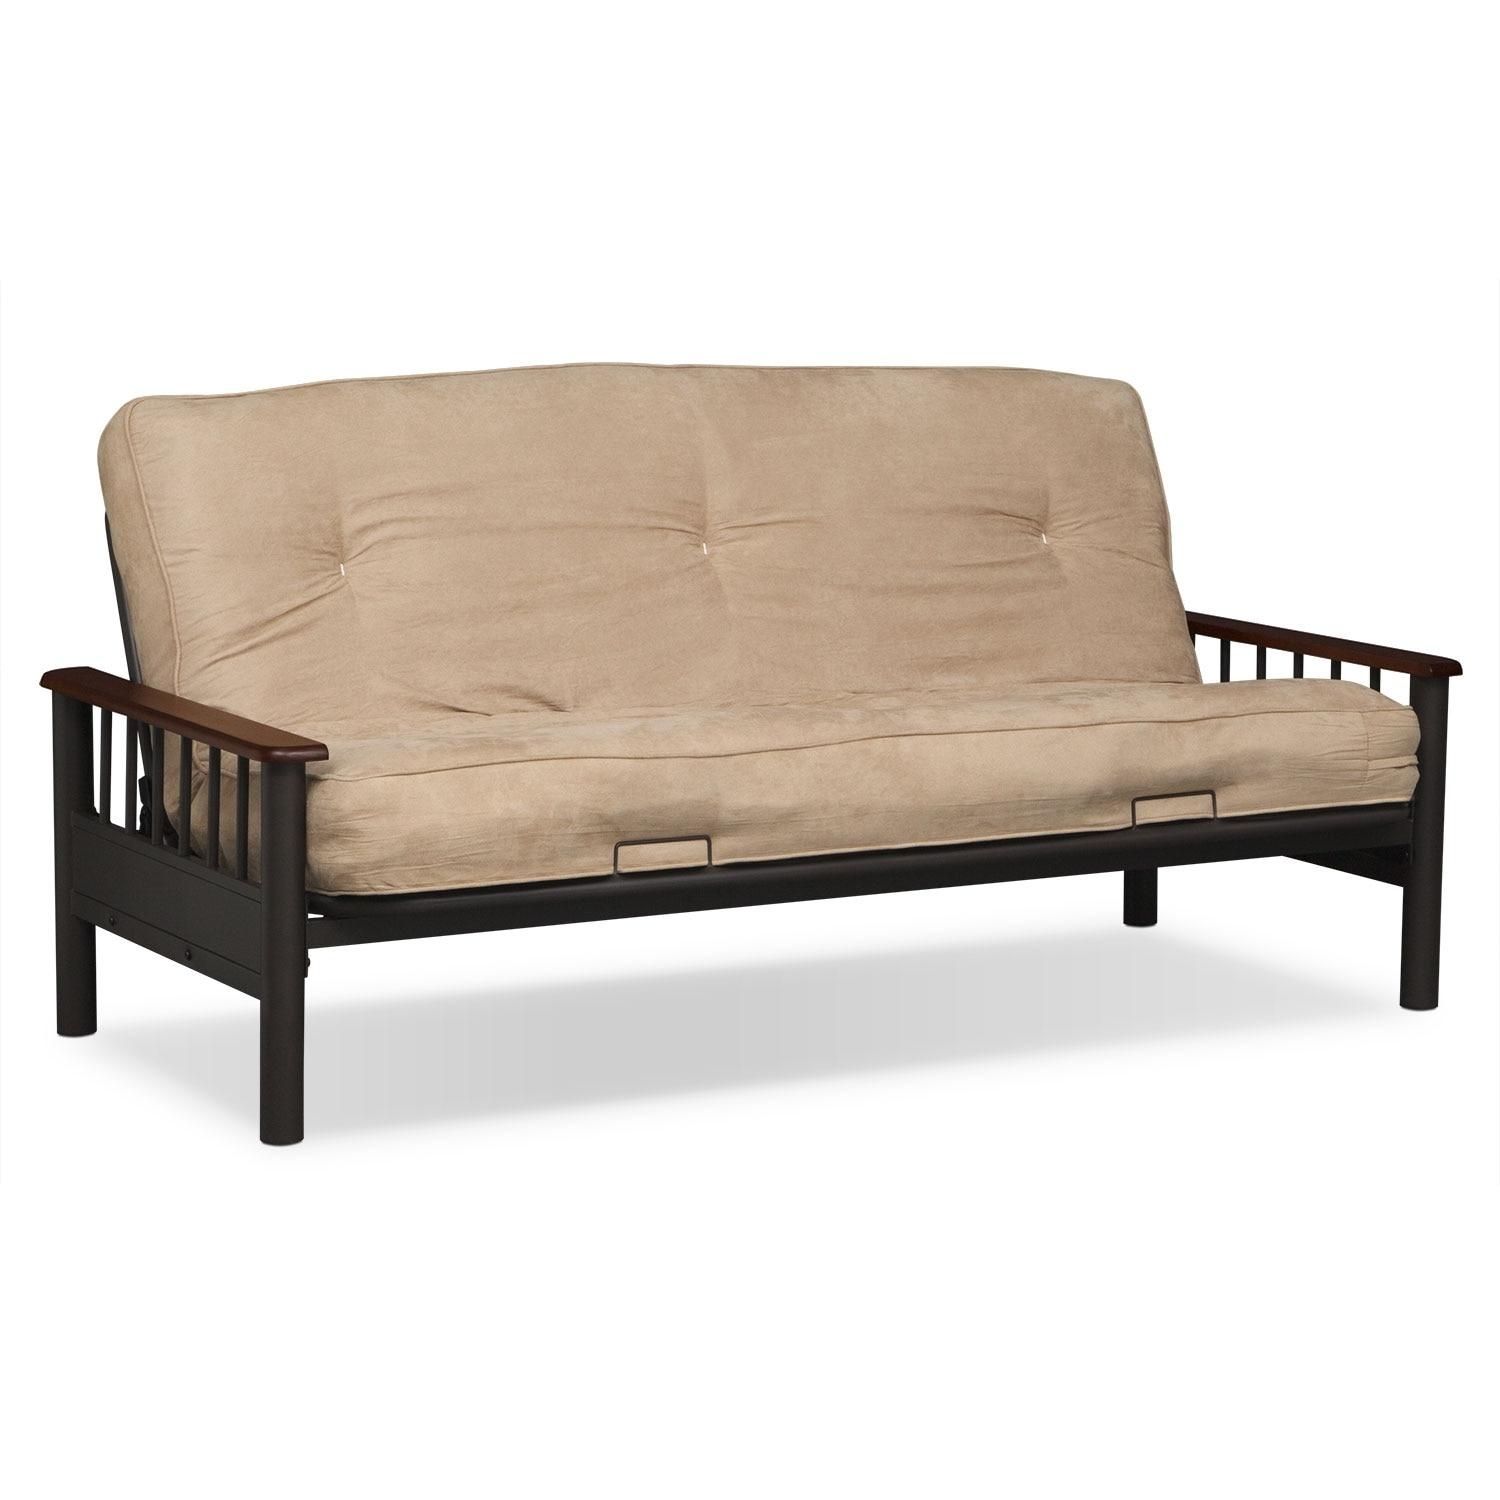 Futons | Living Room Seating | Value City Furniture Throughout Leather Fouton Sofas (View 19 of 20)